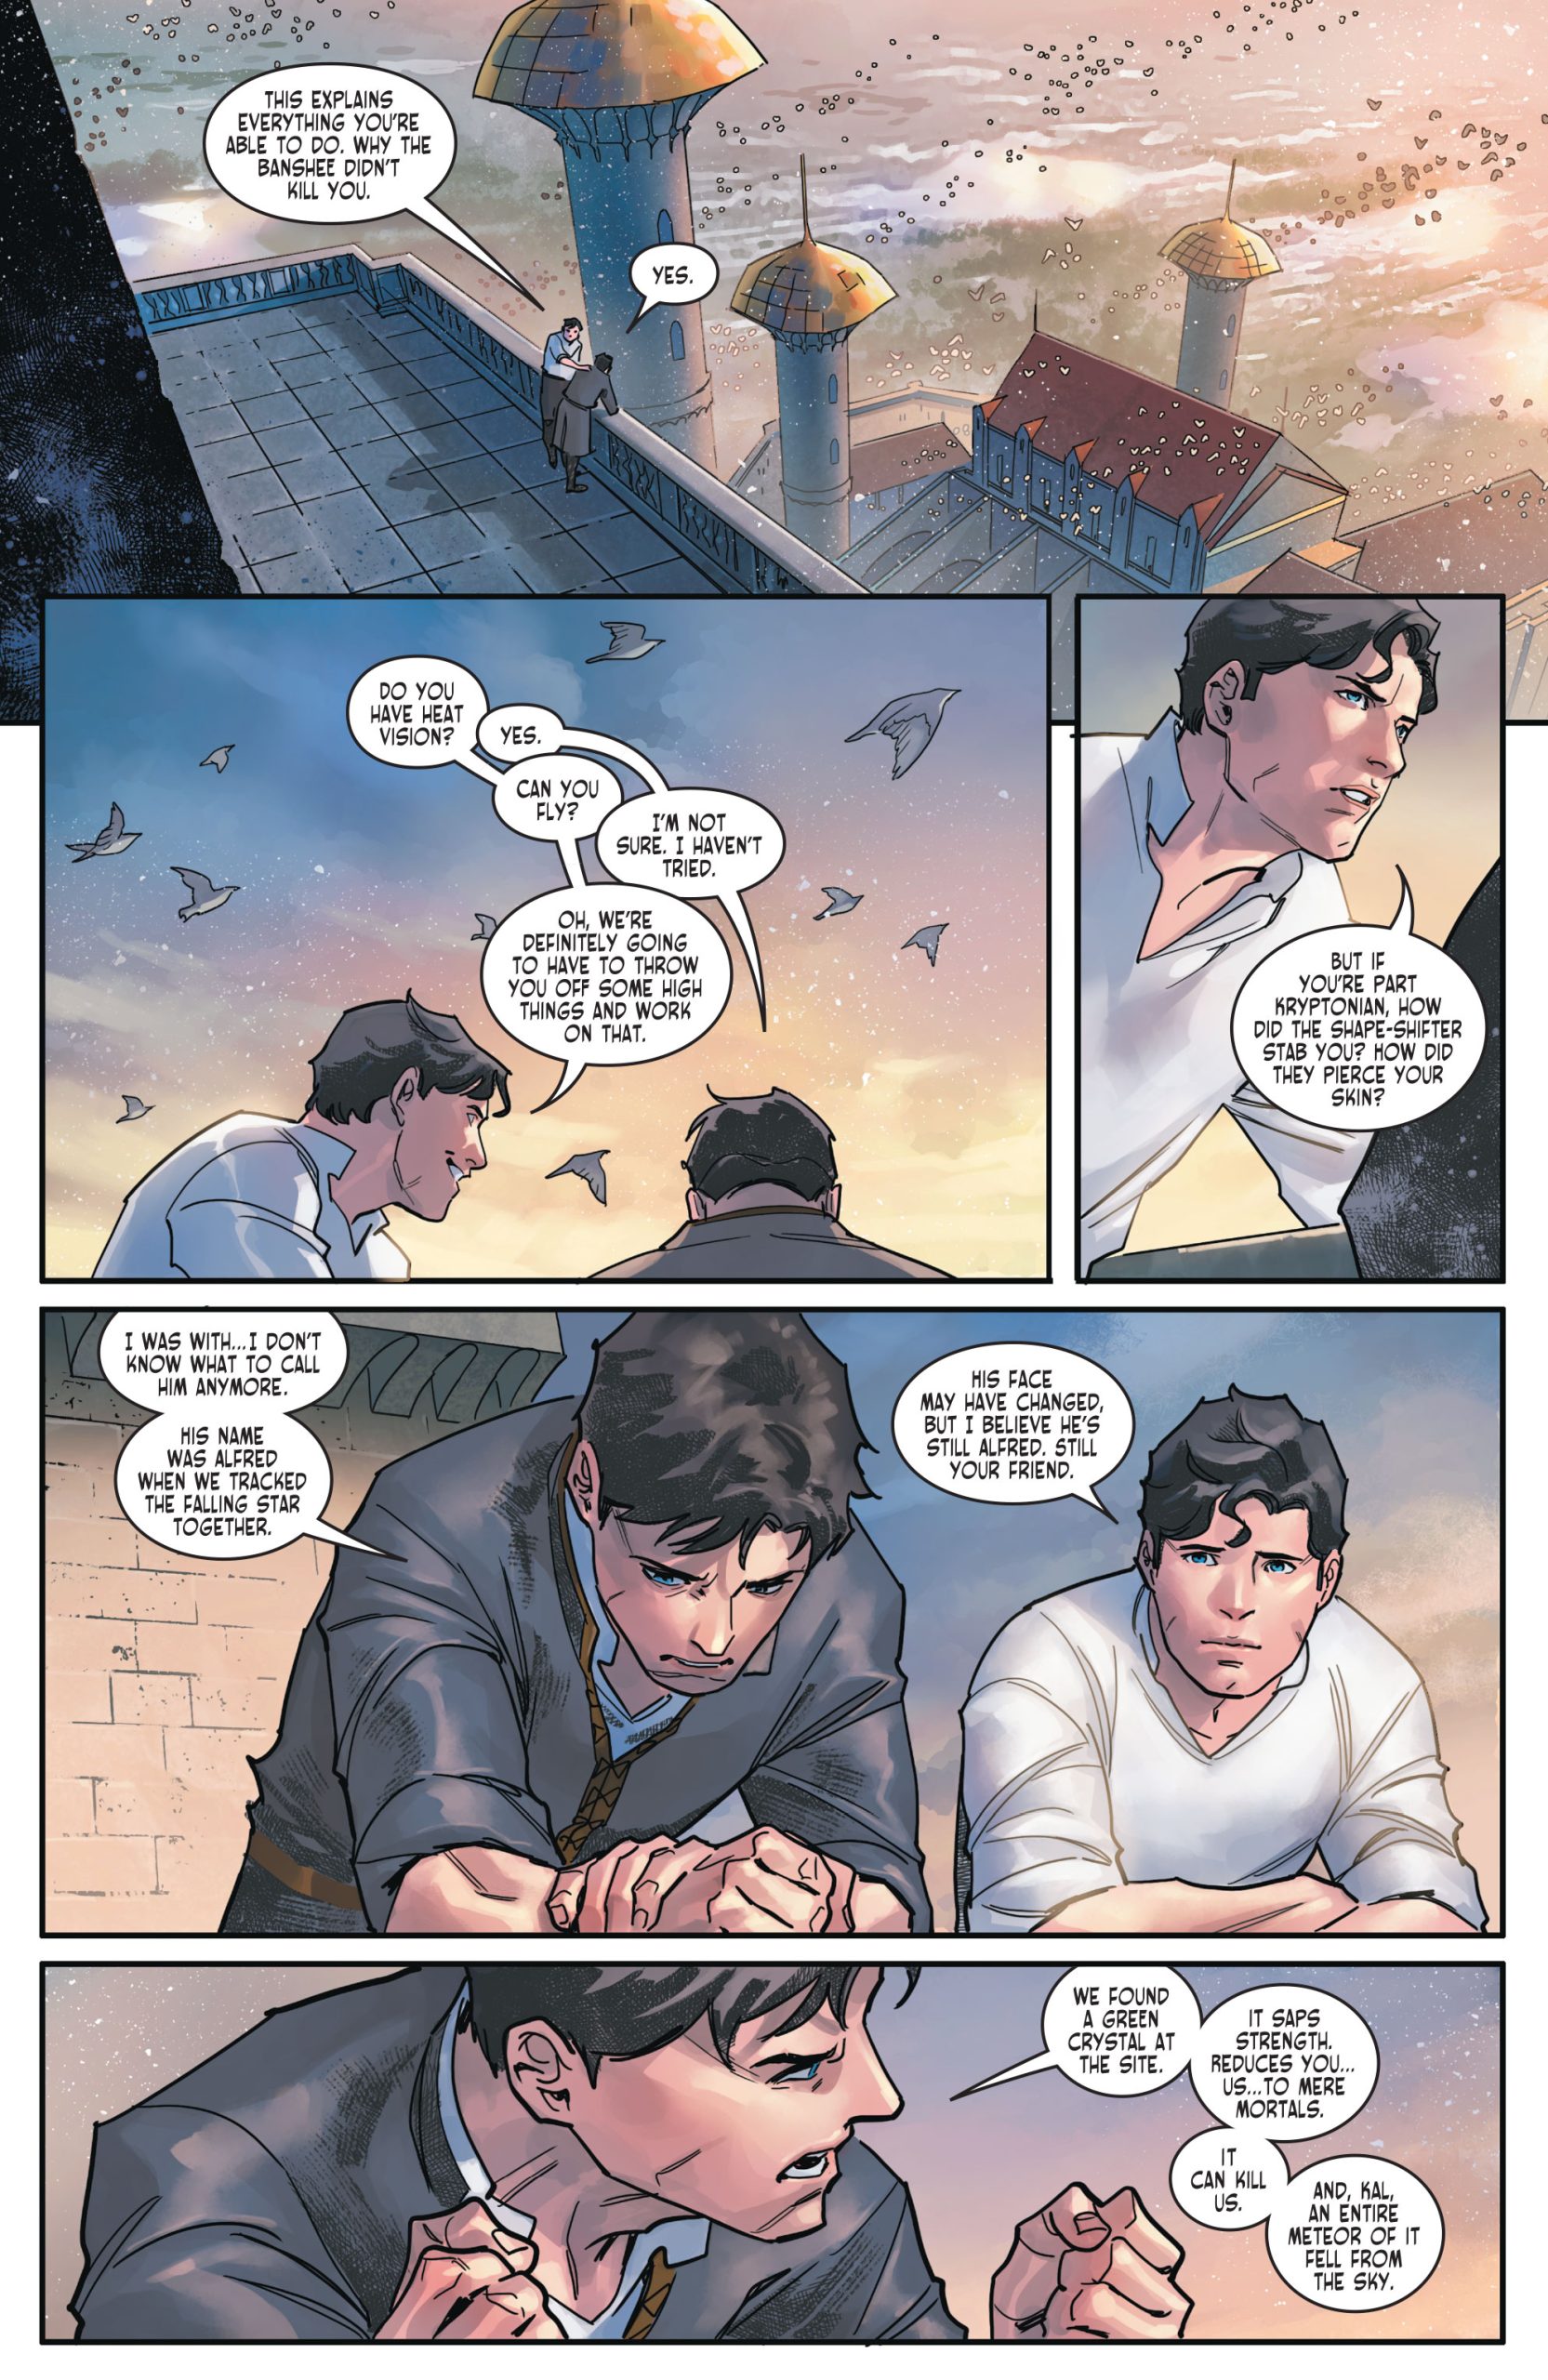 The Man Of Steel #6 // Review — You Don't Read Comics